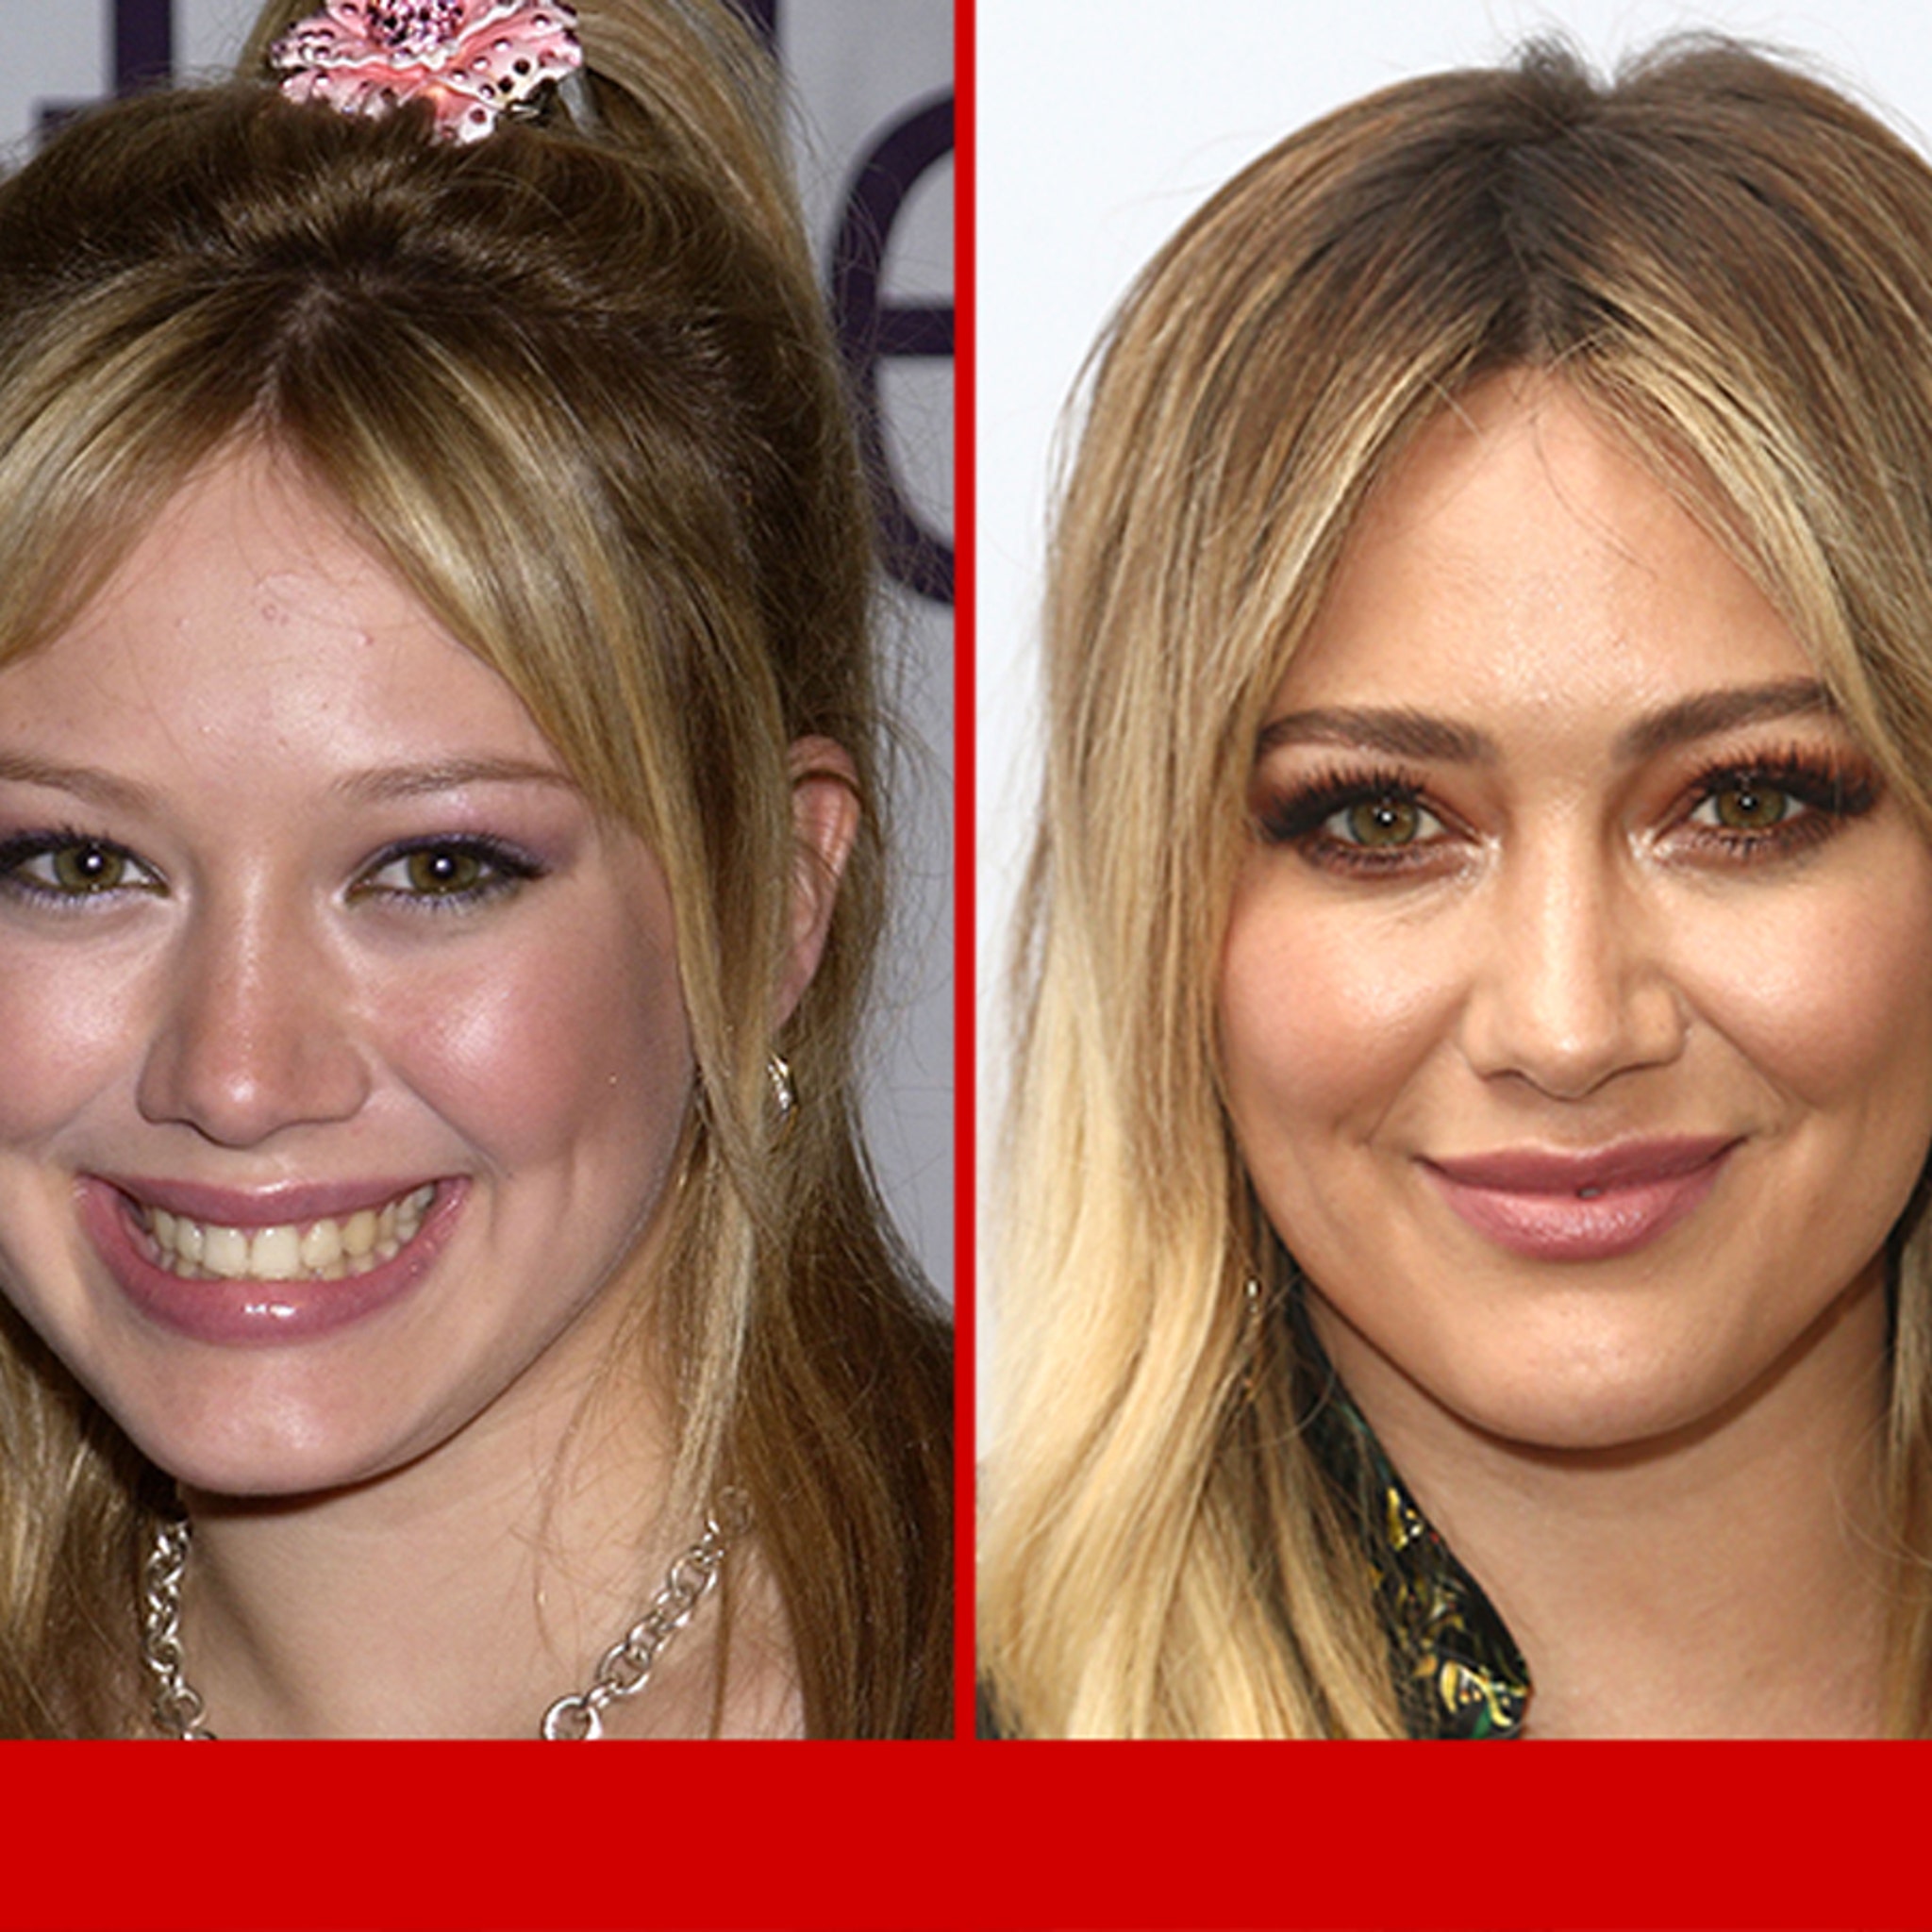 Hilary Duff Has Been Arrested 